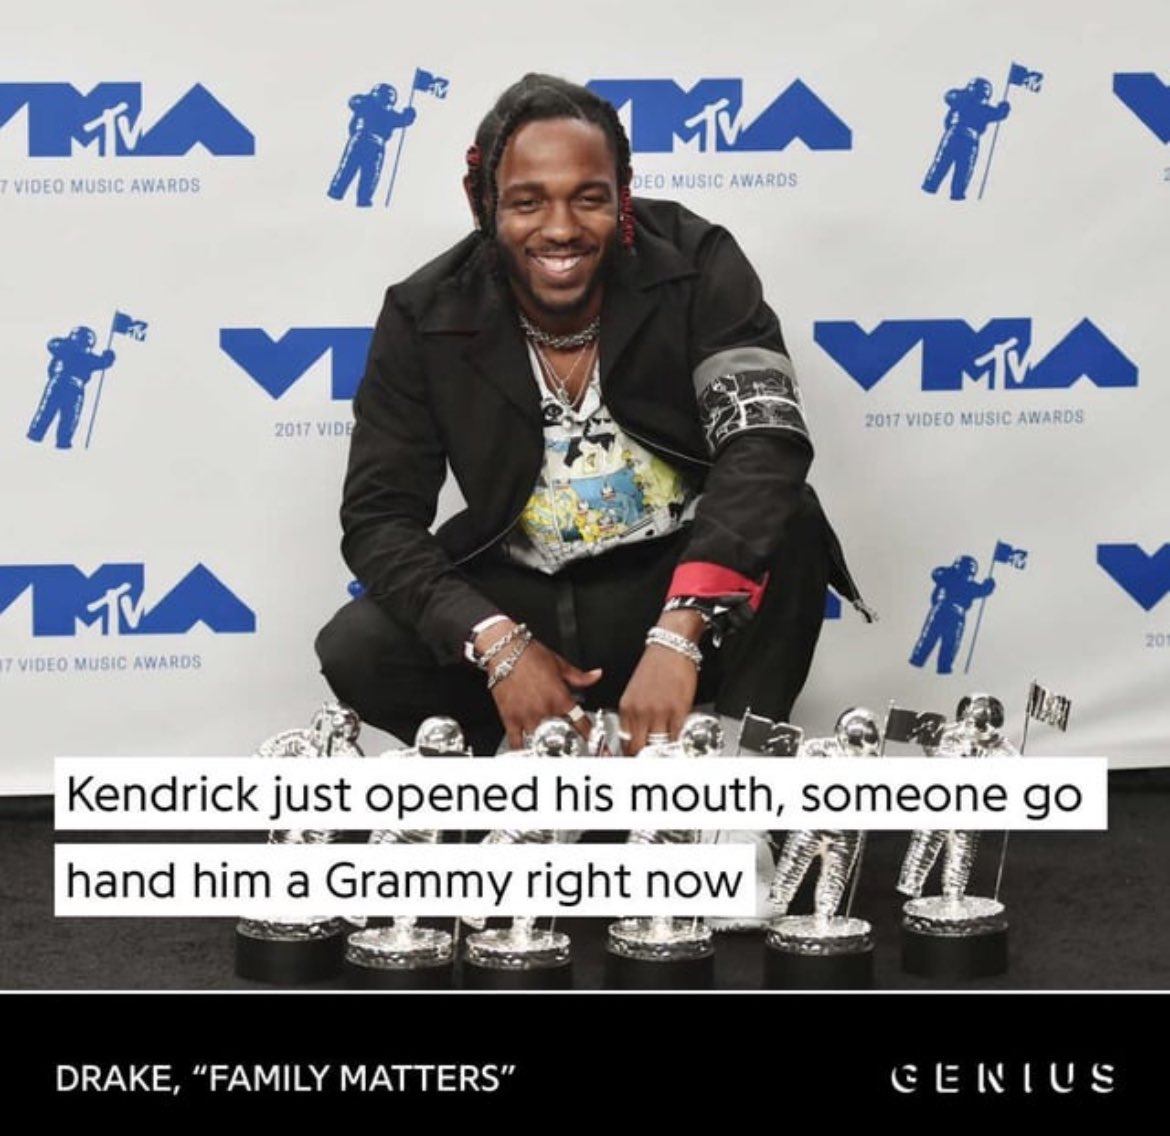 This Drake bar is going to age so hilarious, because why can I already picture Kendrick winning a grammy for one of his diss tracks 😭